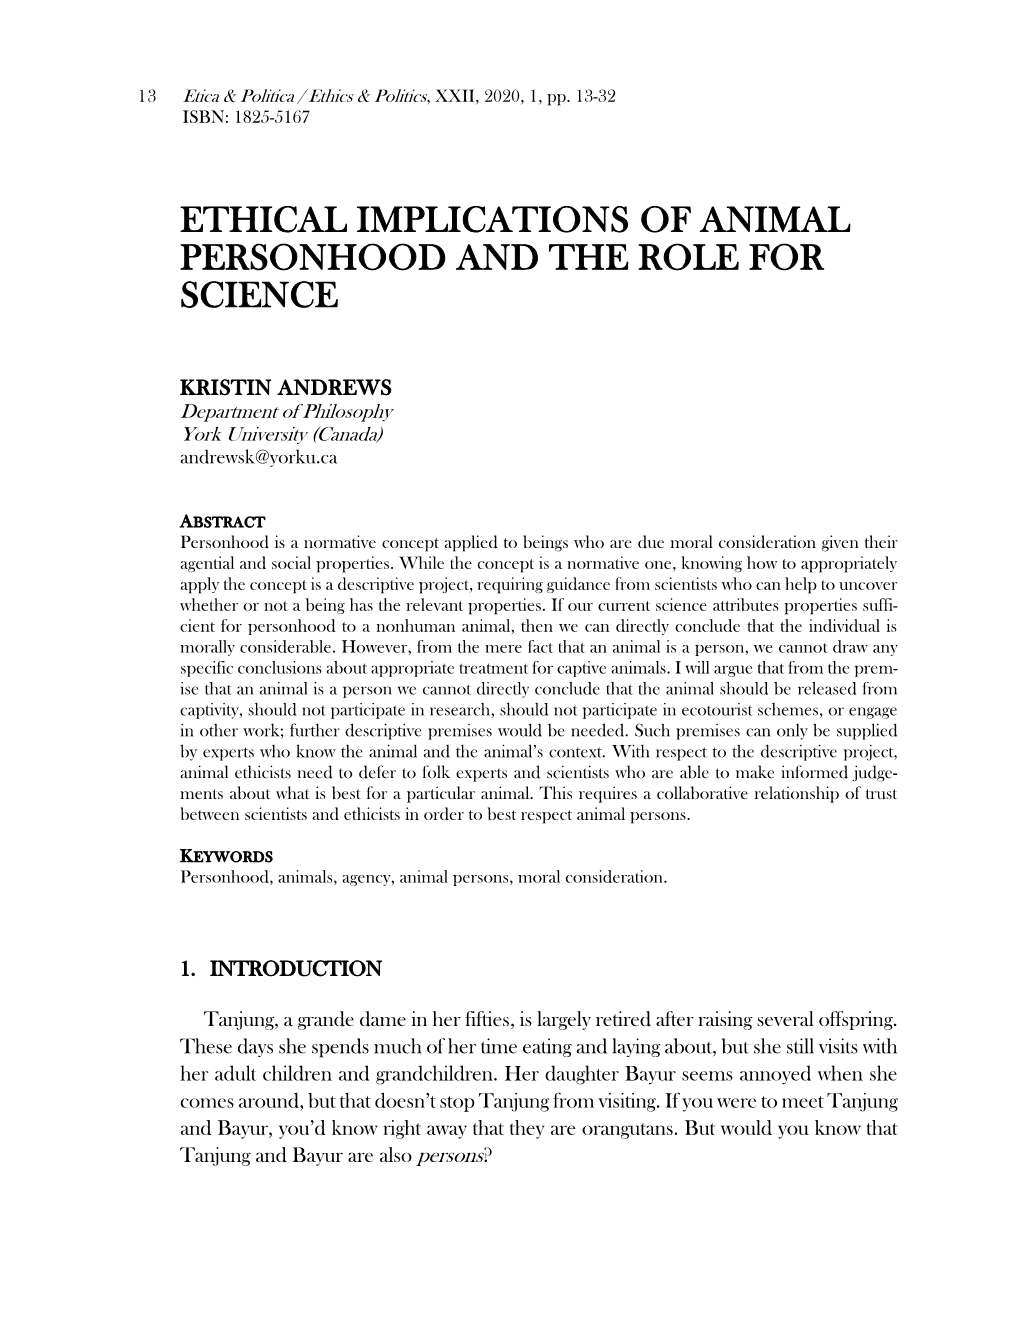 Ethical Implications of Animal Personhood and the Role for Science